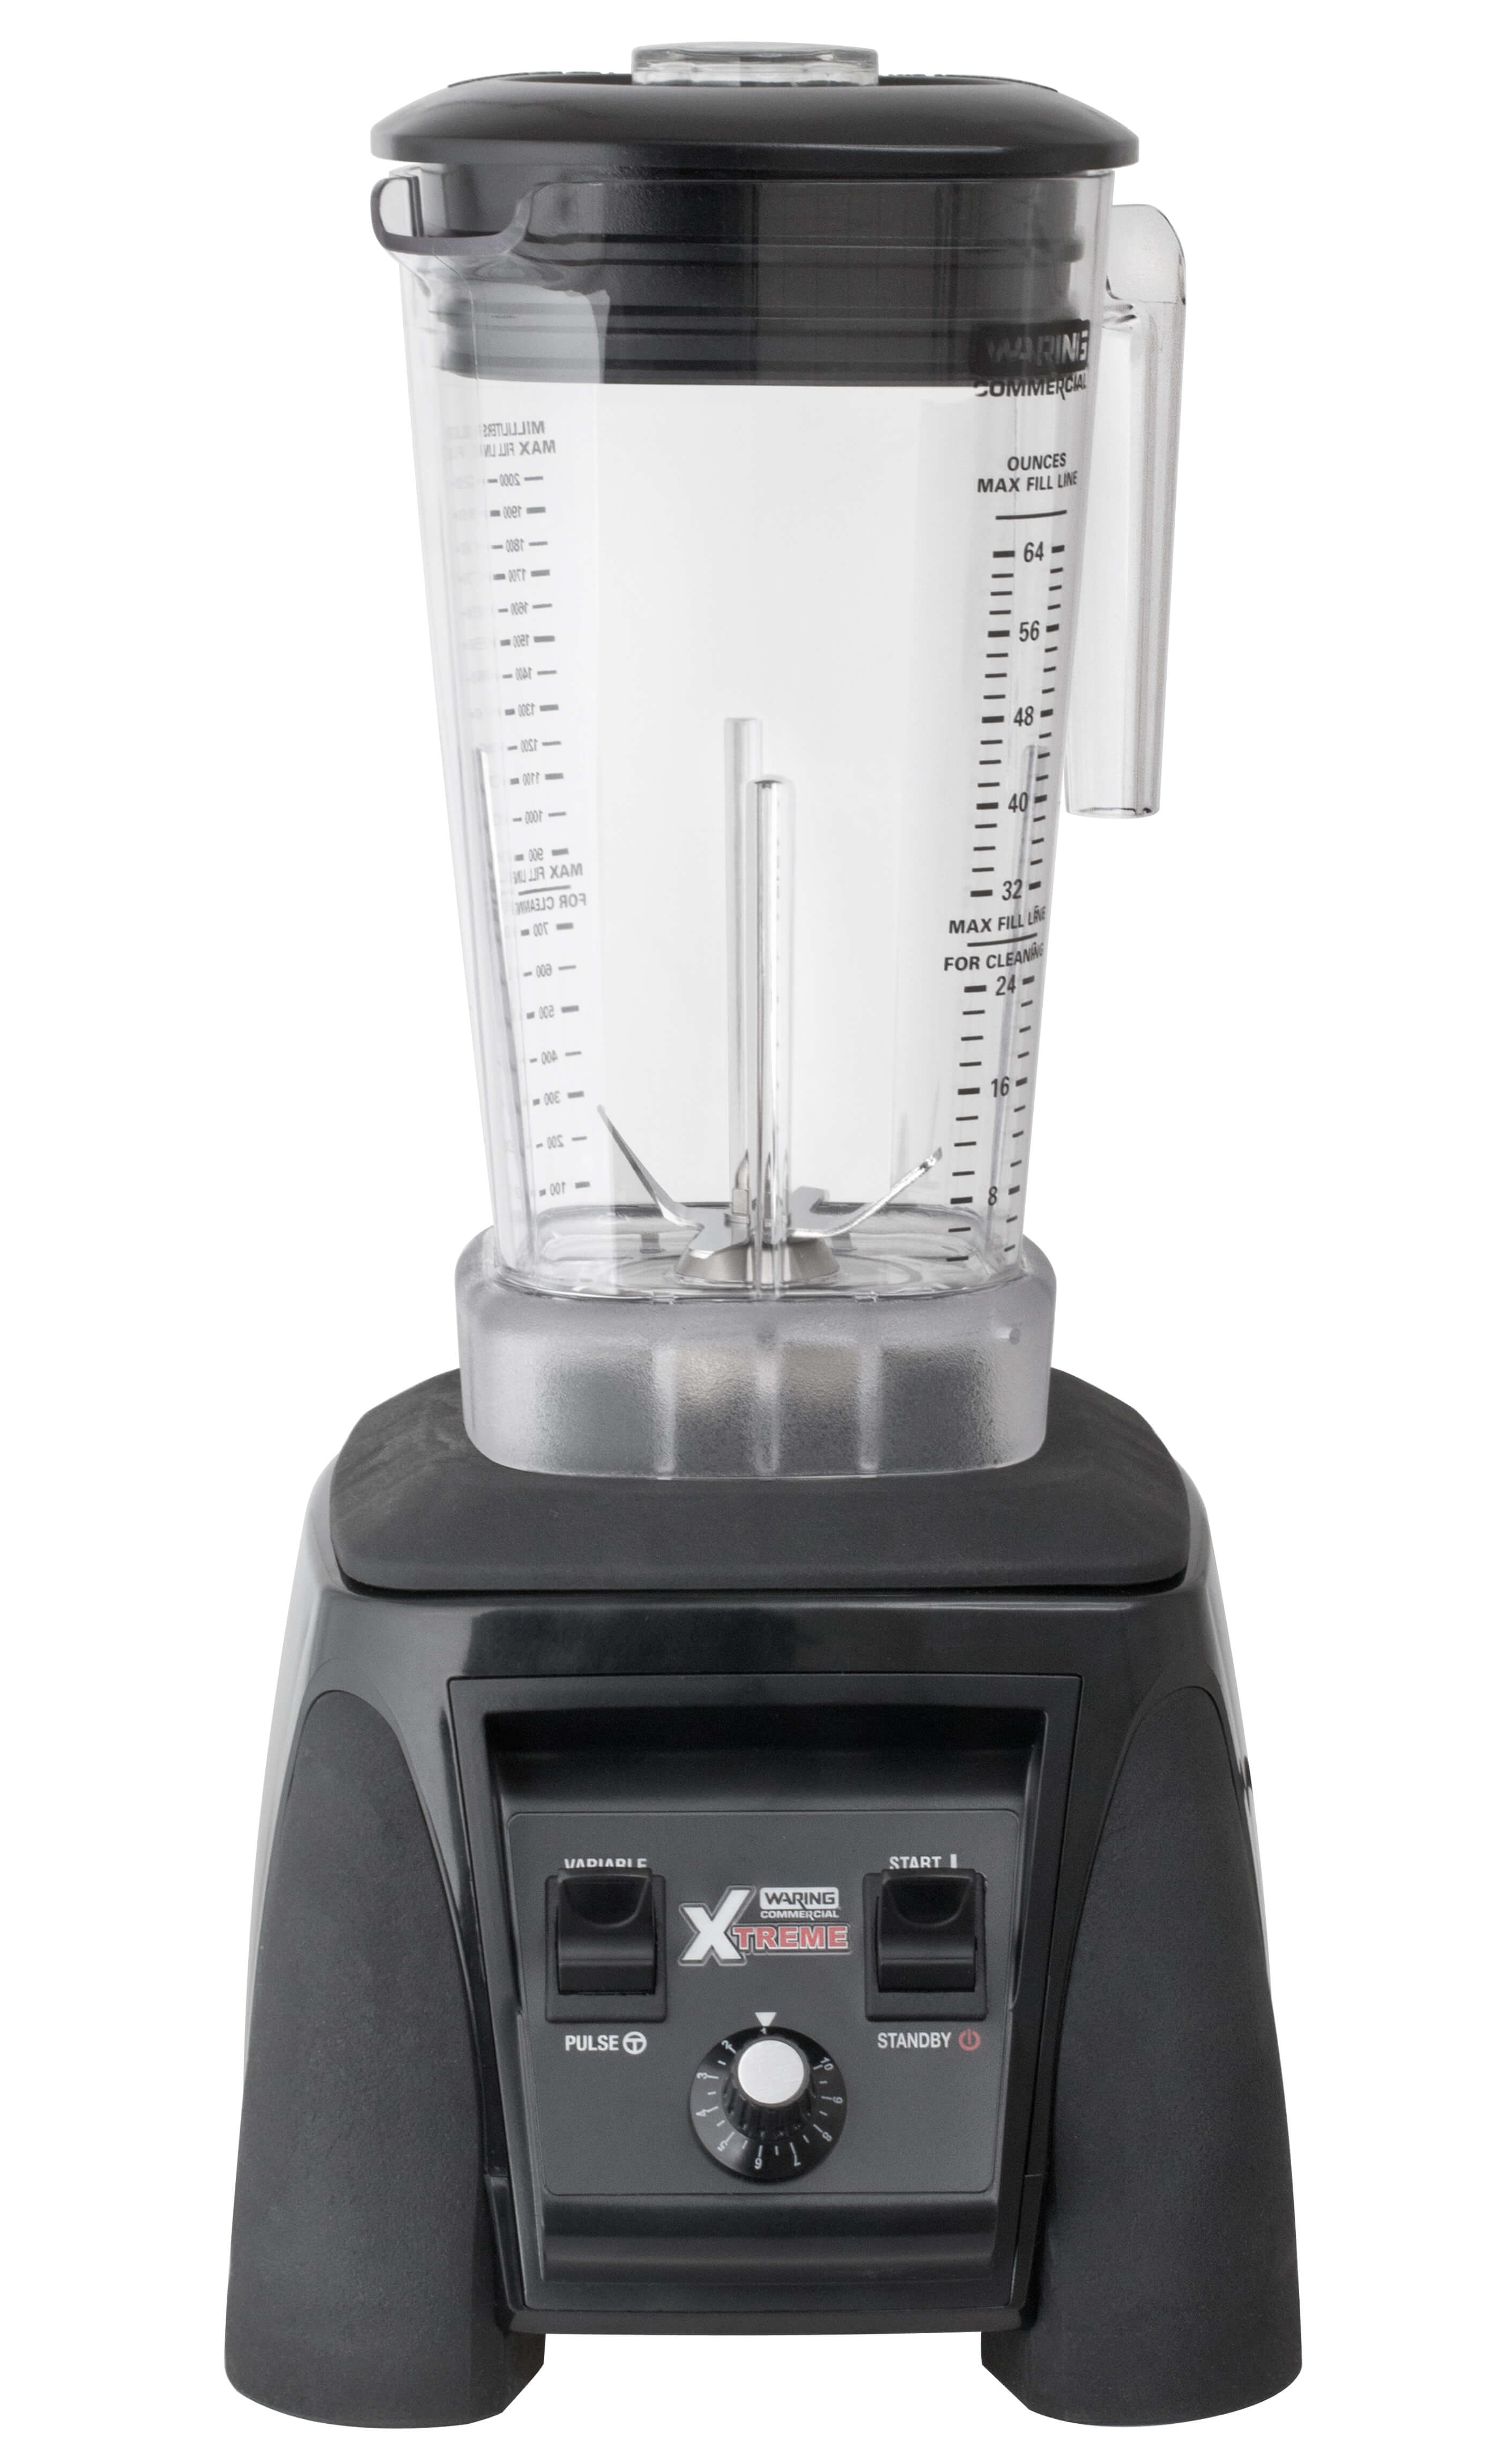 Blender with variable speed control - Waring (MX1200)